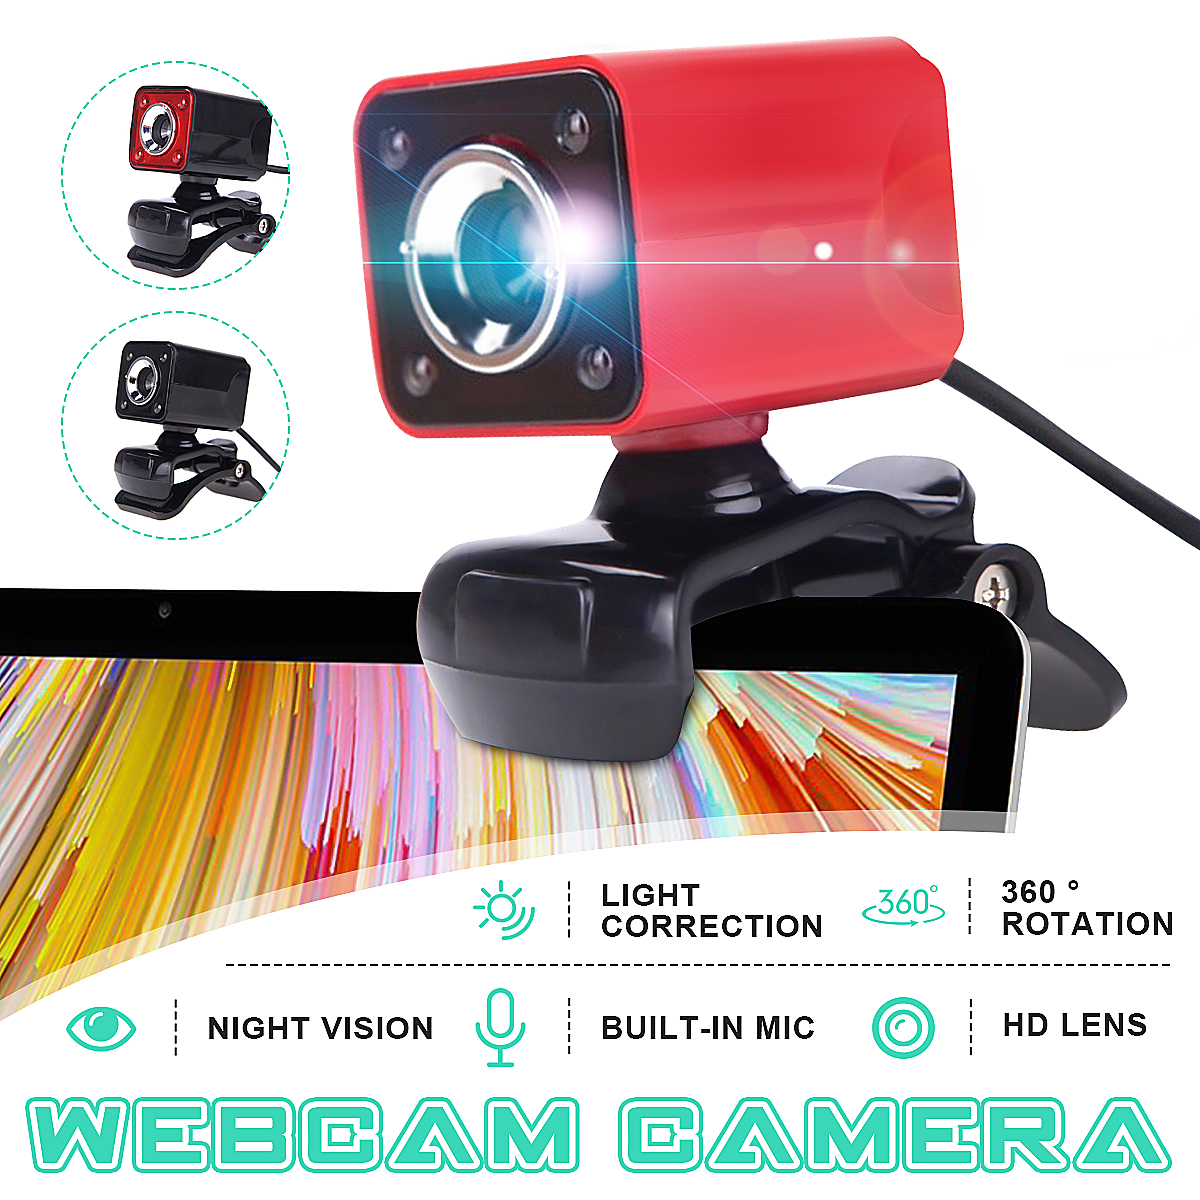 360deg-Rotation-USB-HD-Webcam-Camera-with-Built-in-Microphone-LED-Night-Vision-for-PC-Laptop-Desktop-1681680-2